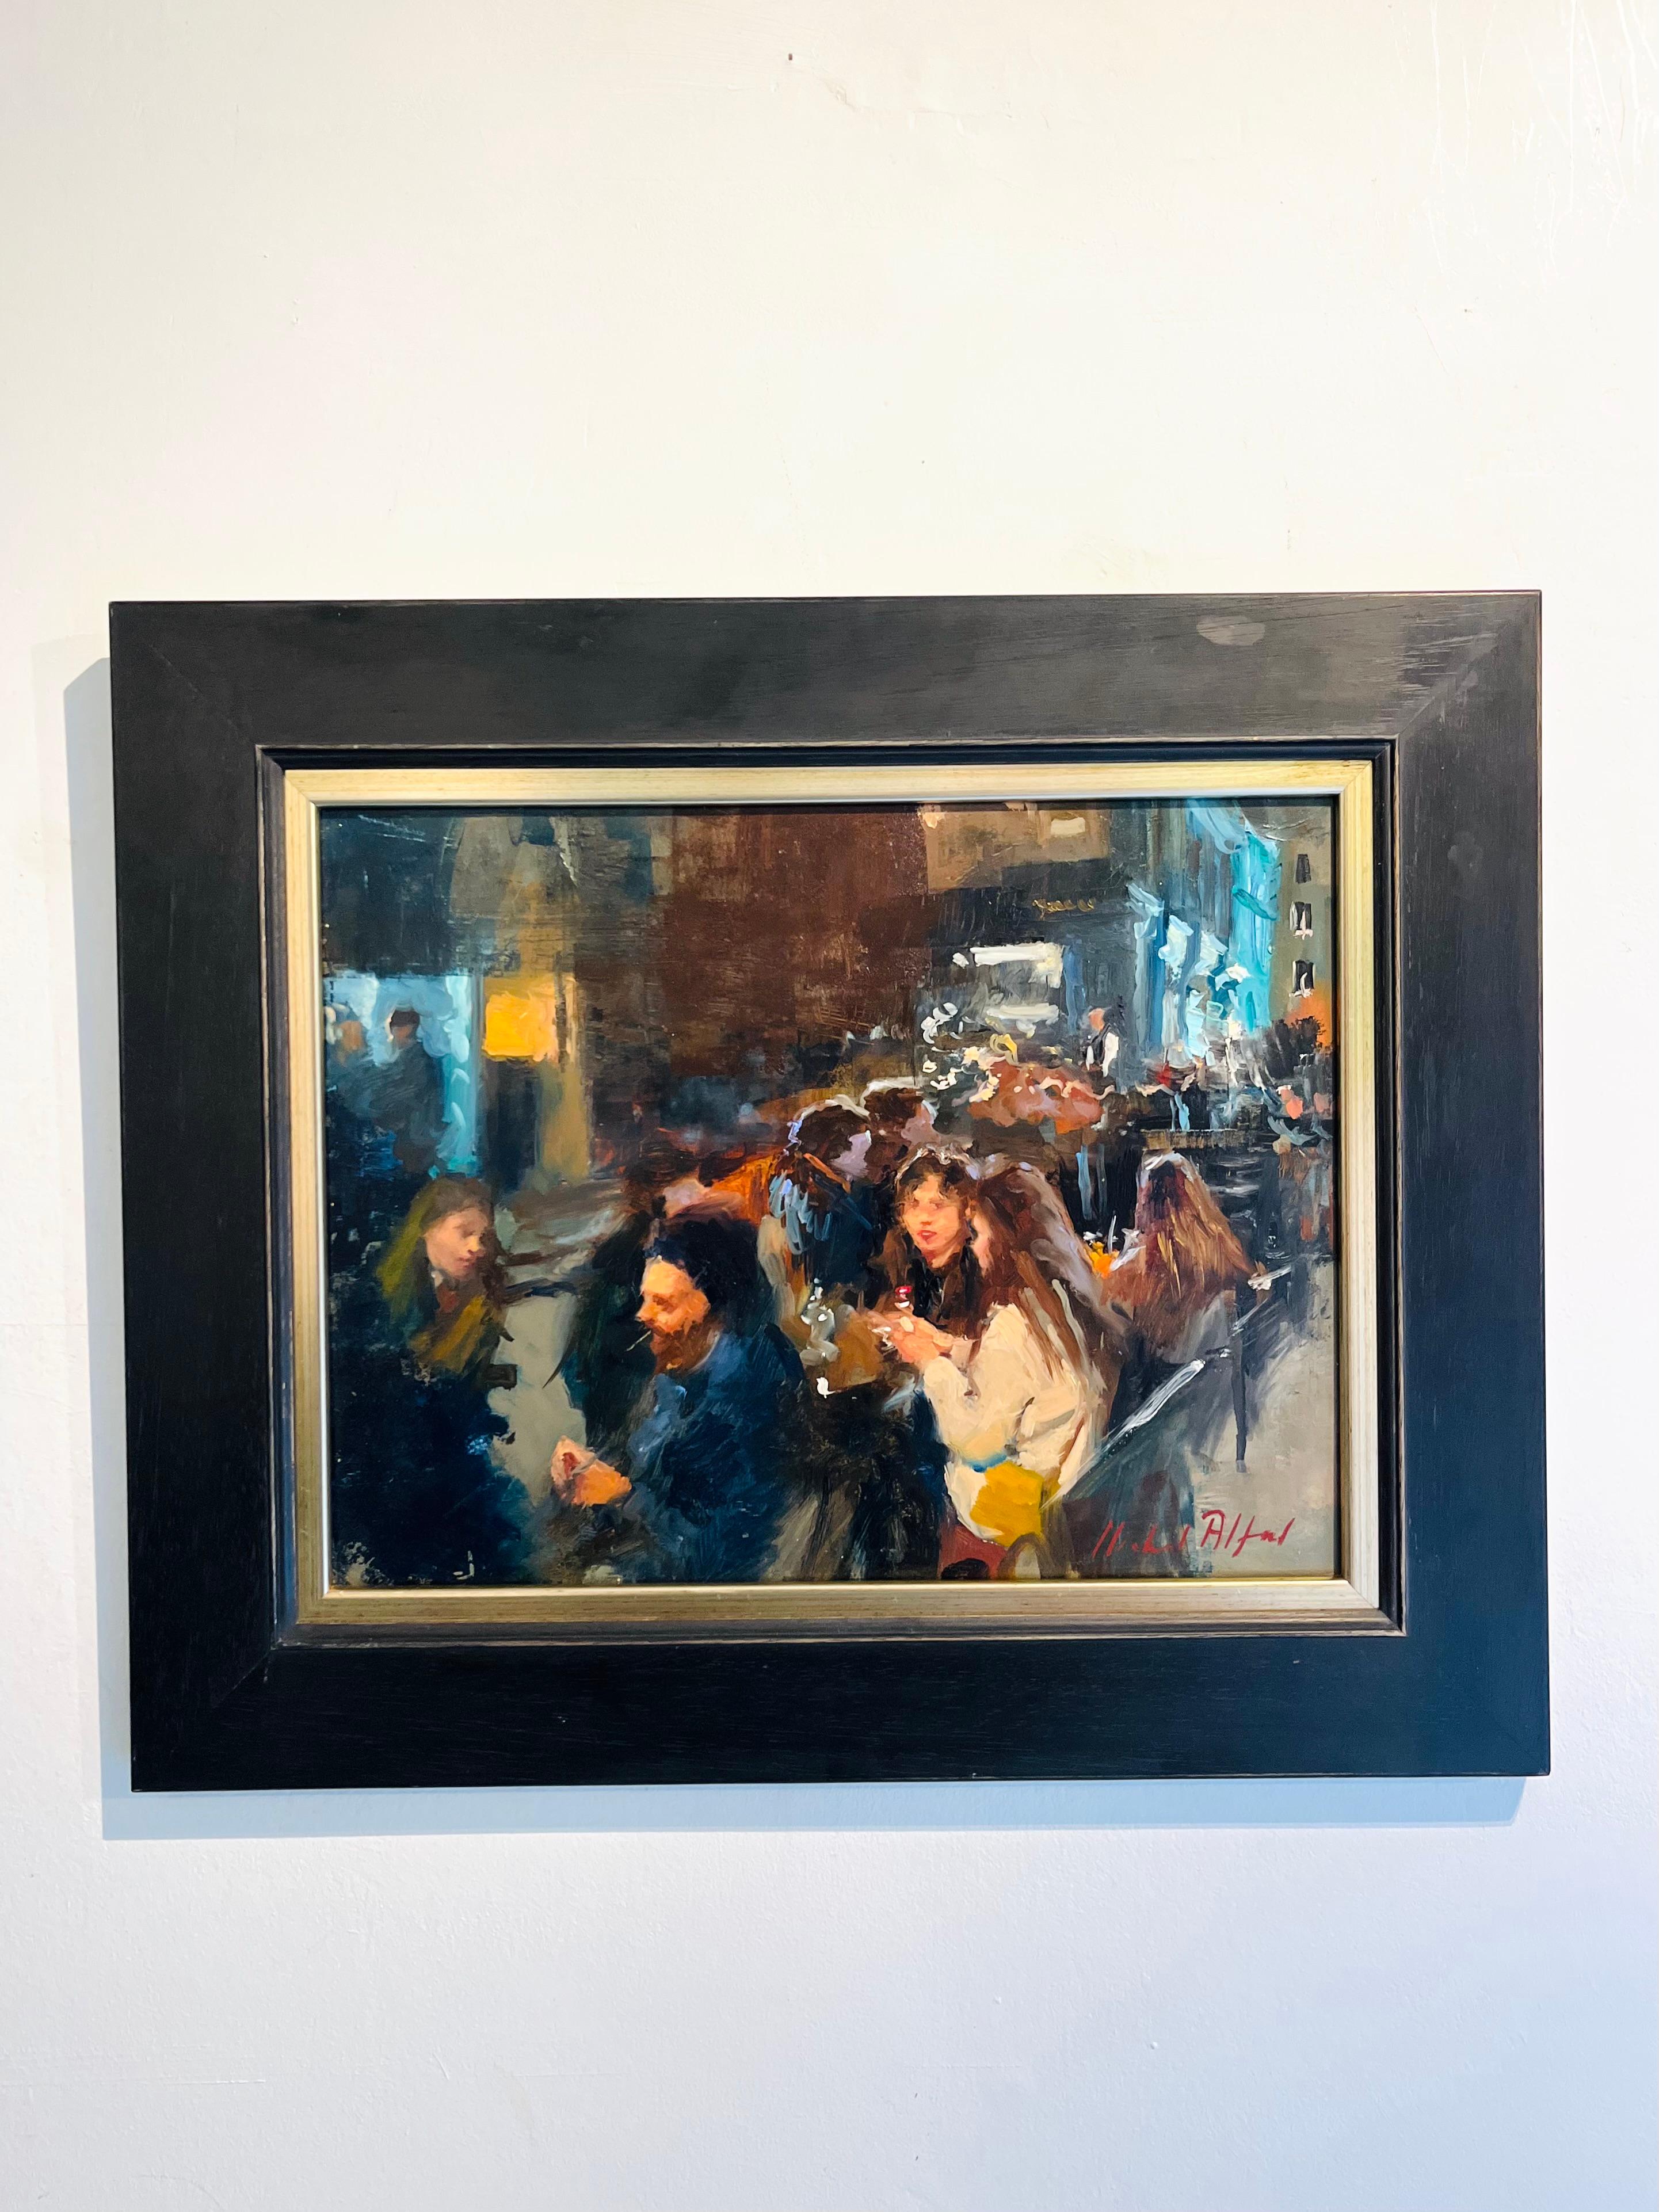 Outside Dining, West End-original impressionism figurative cityscape painting  - Painting by Michael Alford